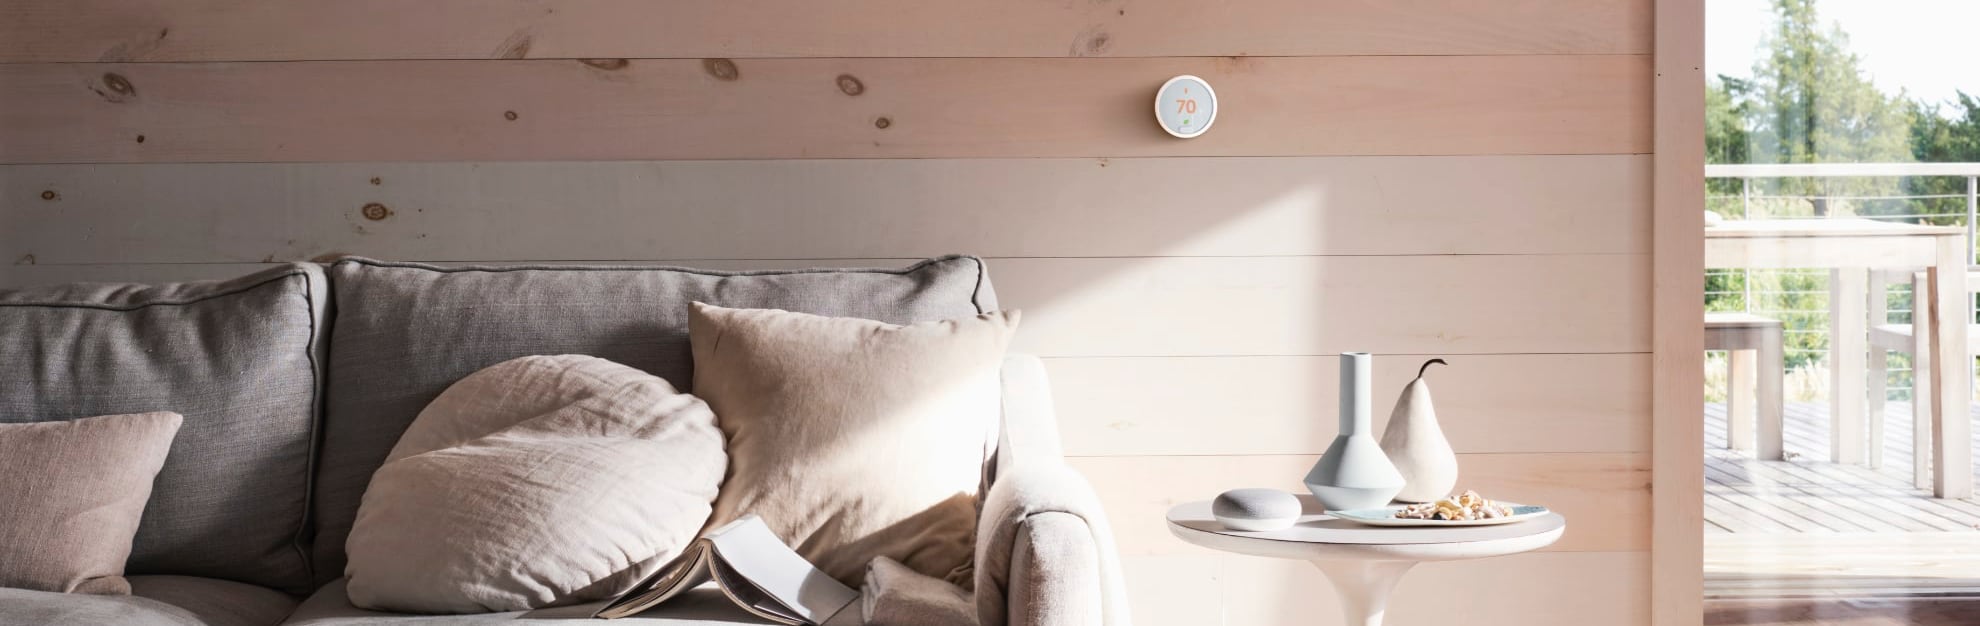 Vivint Home Automation in Oakland